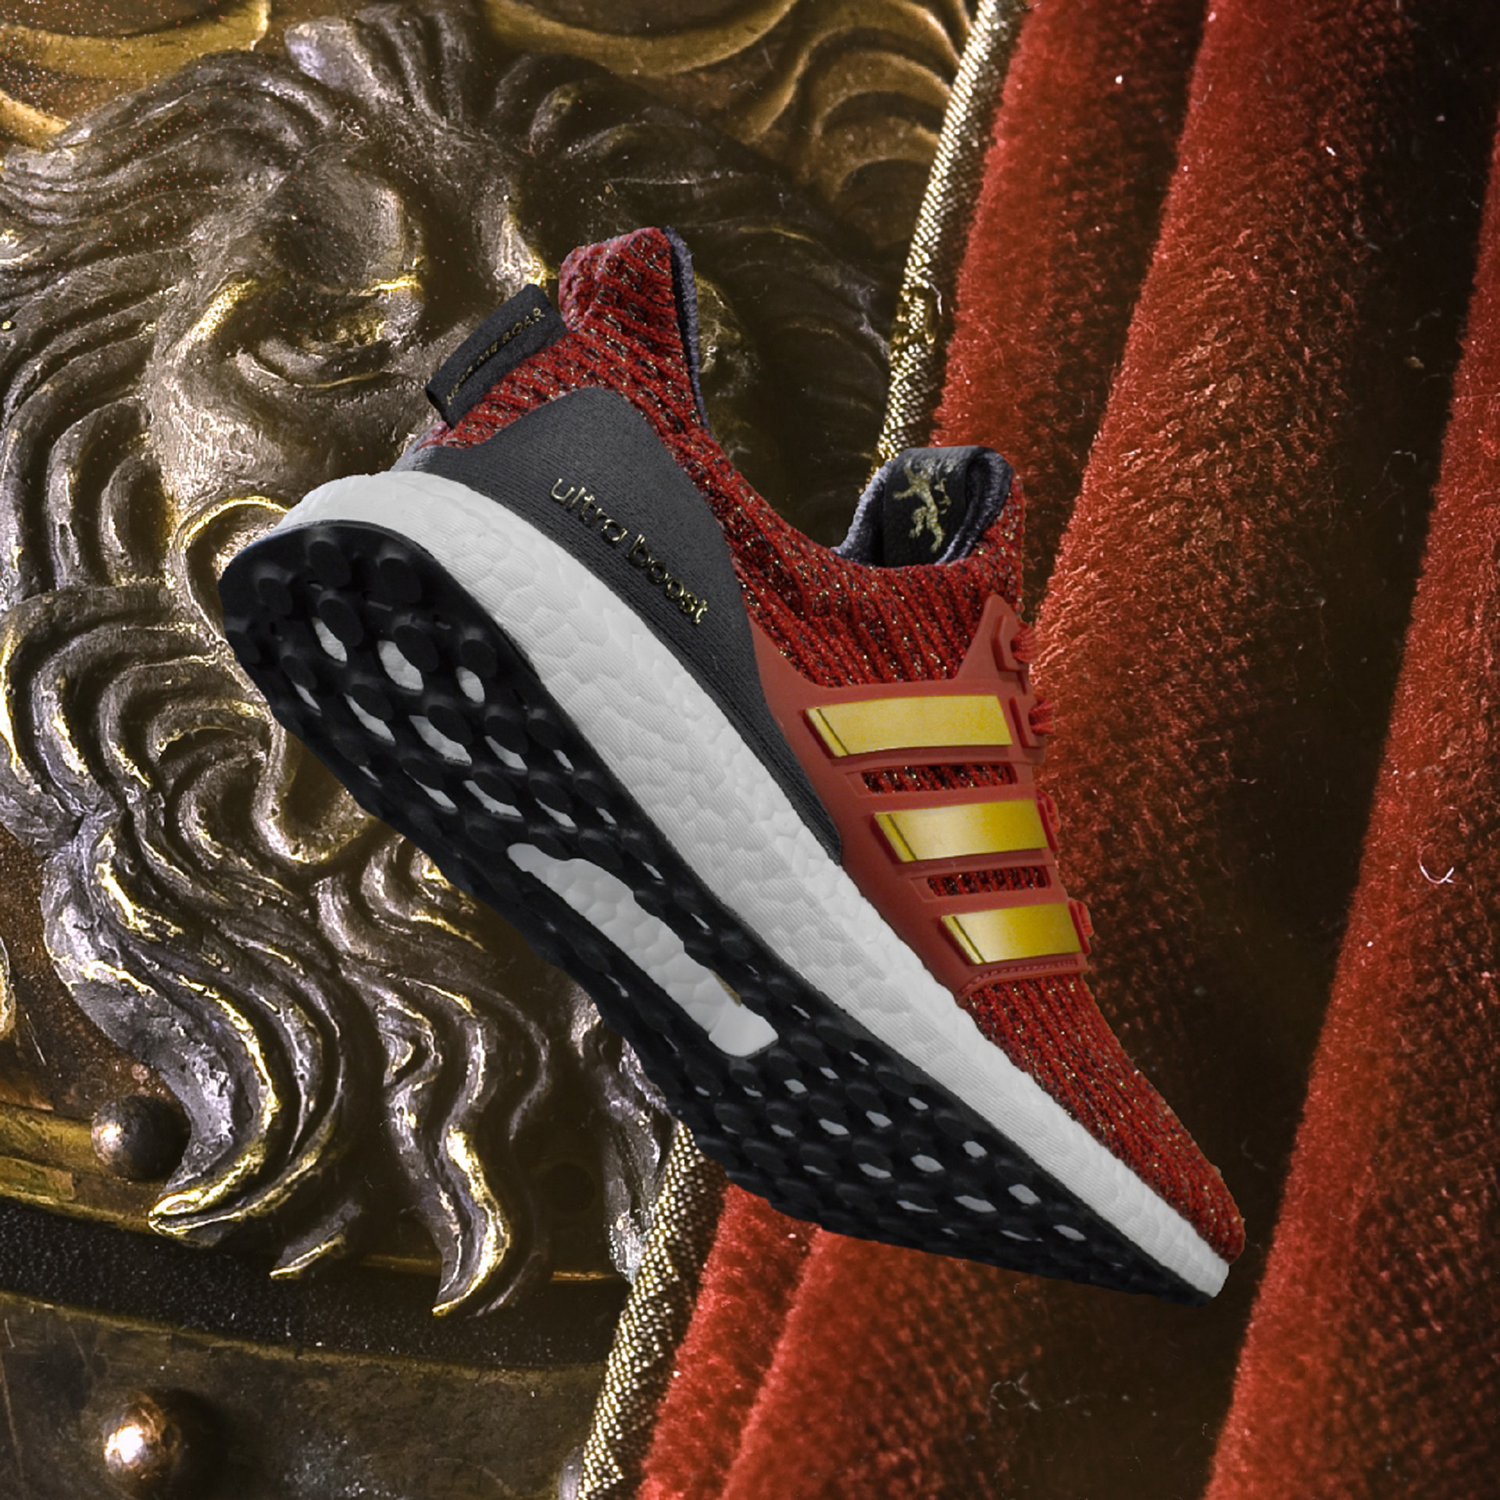 Adidas Finally Drops those Magical Game of Thrones Sneakers The Manual